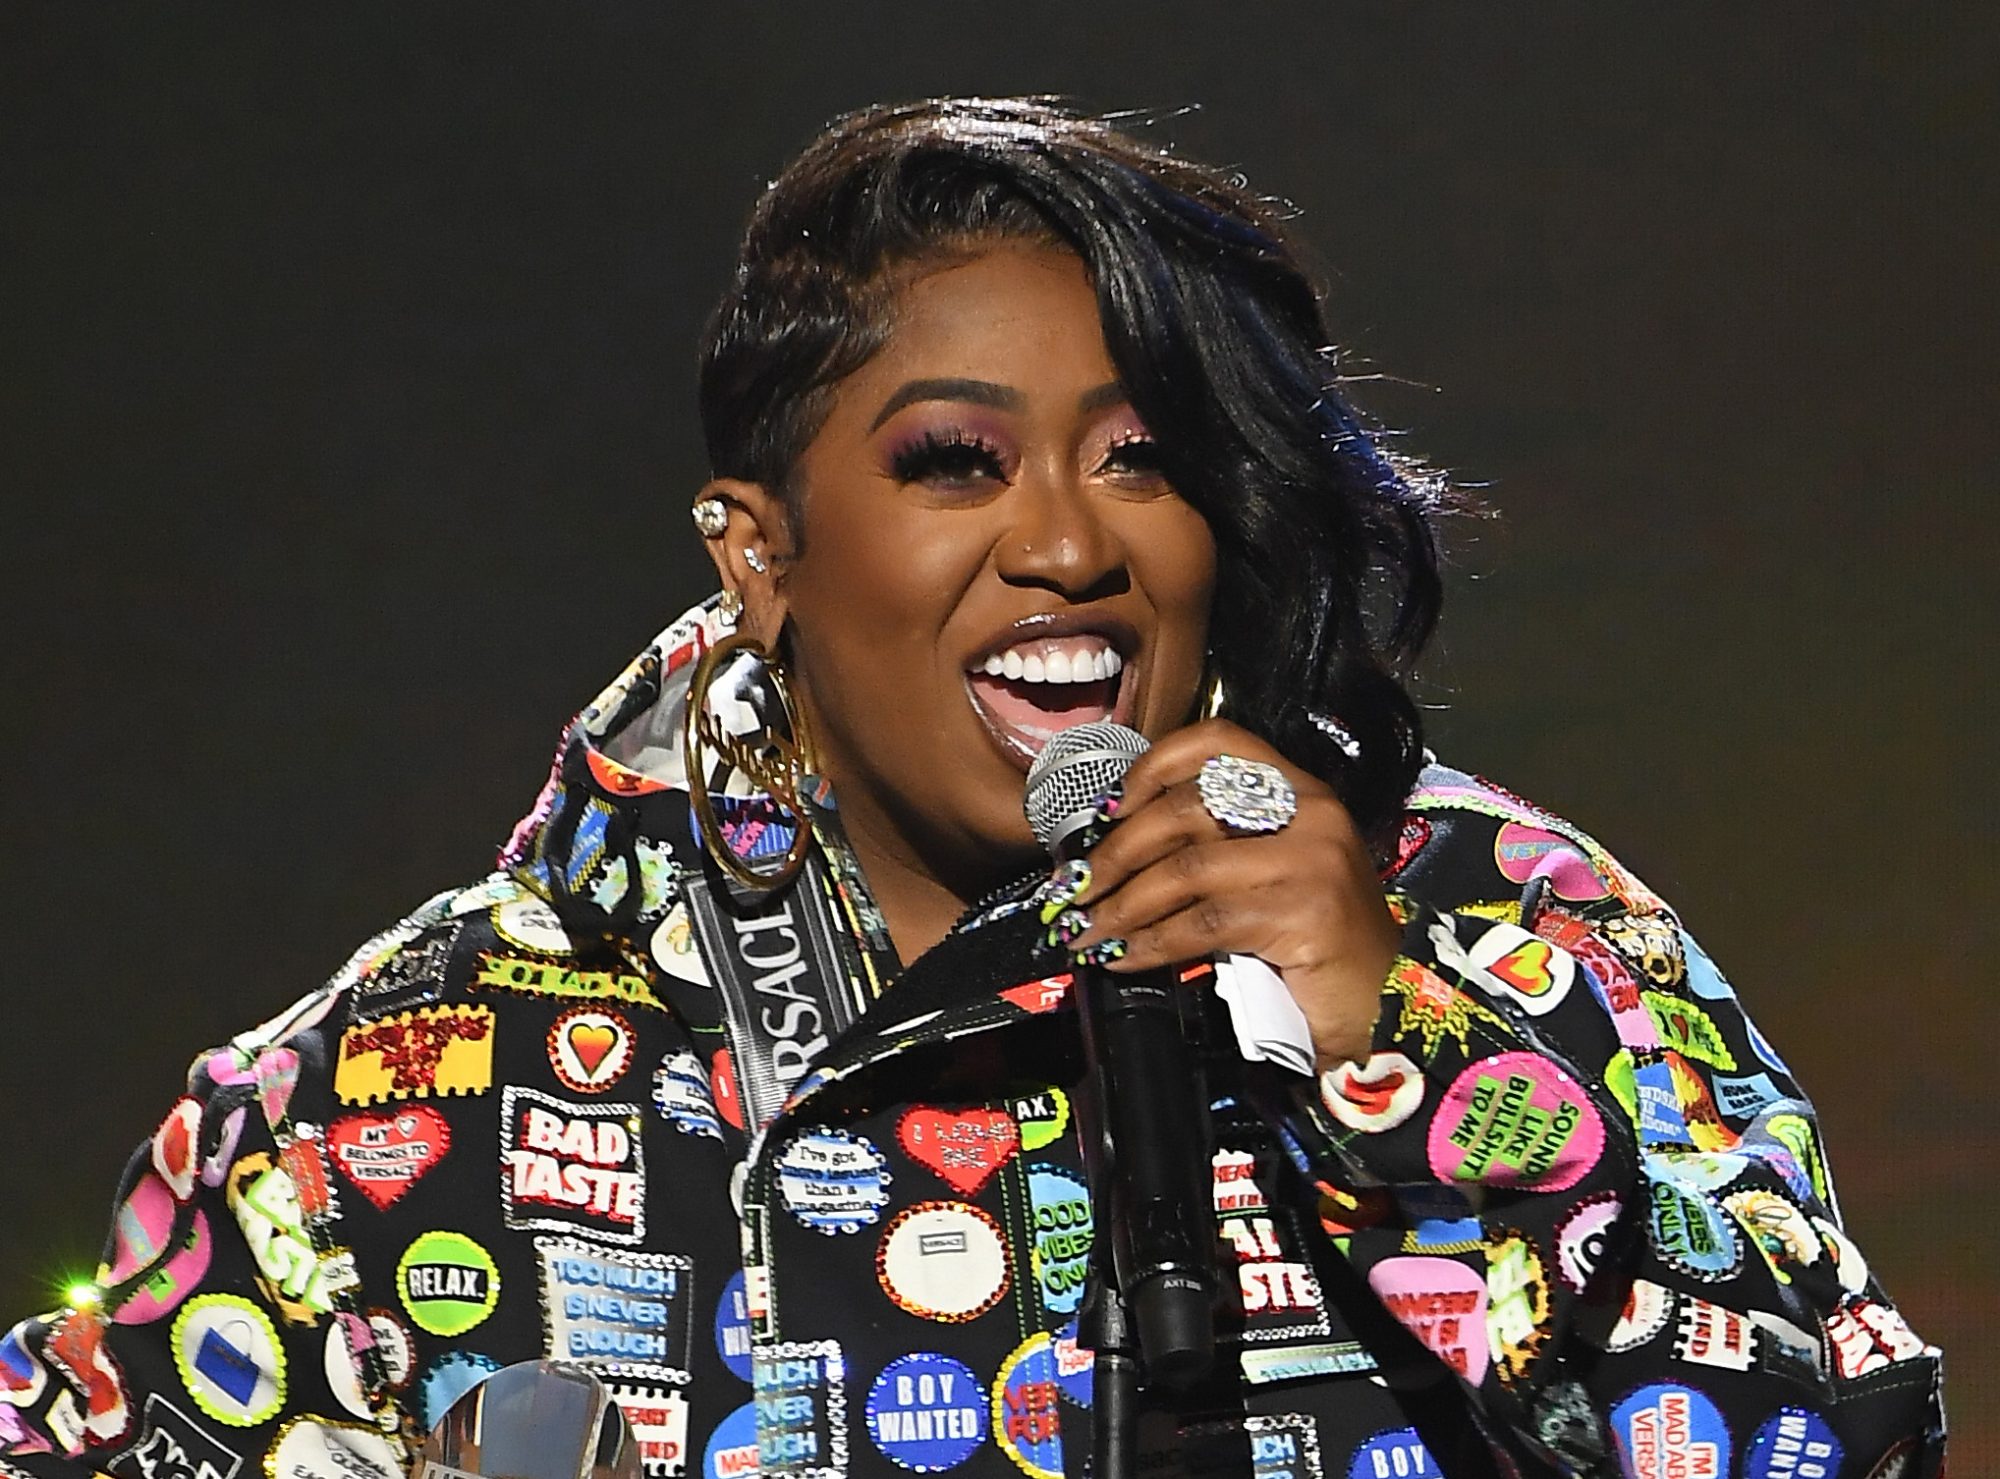 10 Richest Female Rappers And Their Net Worth